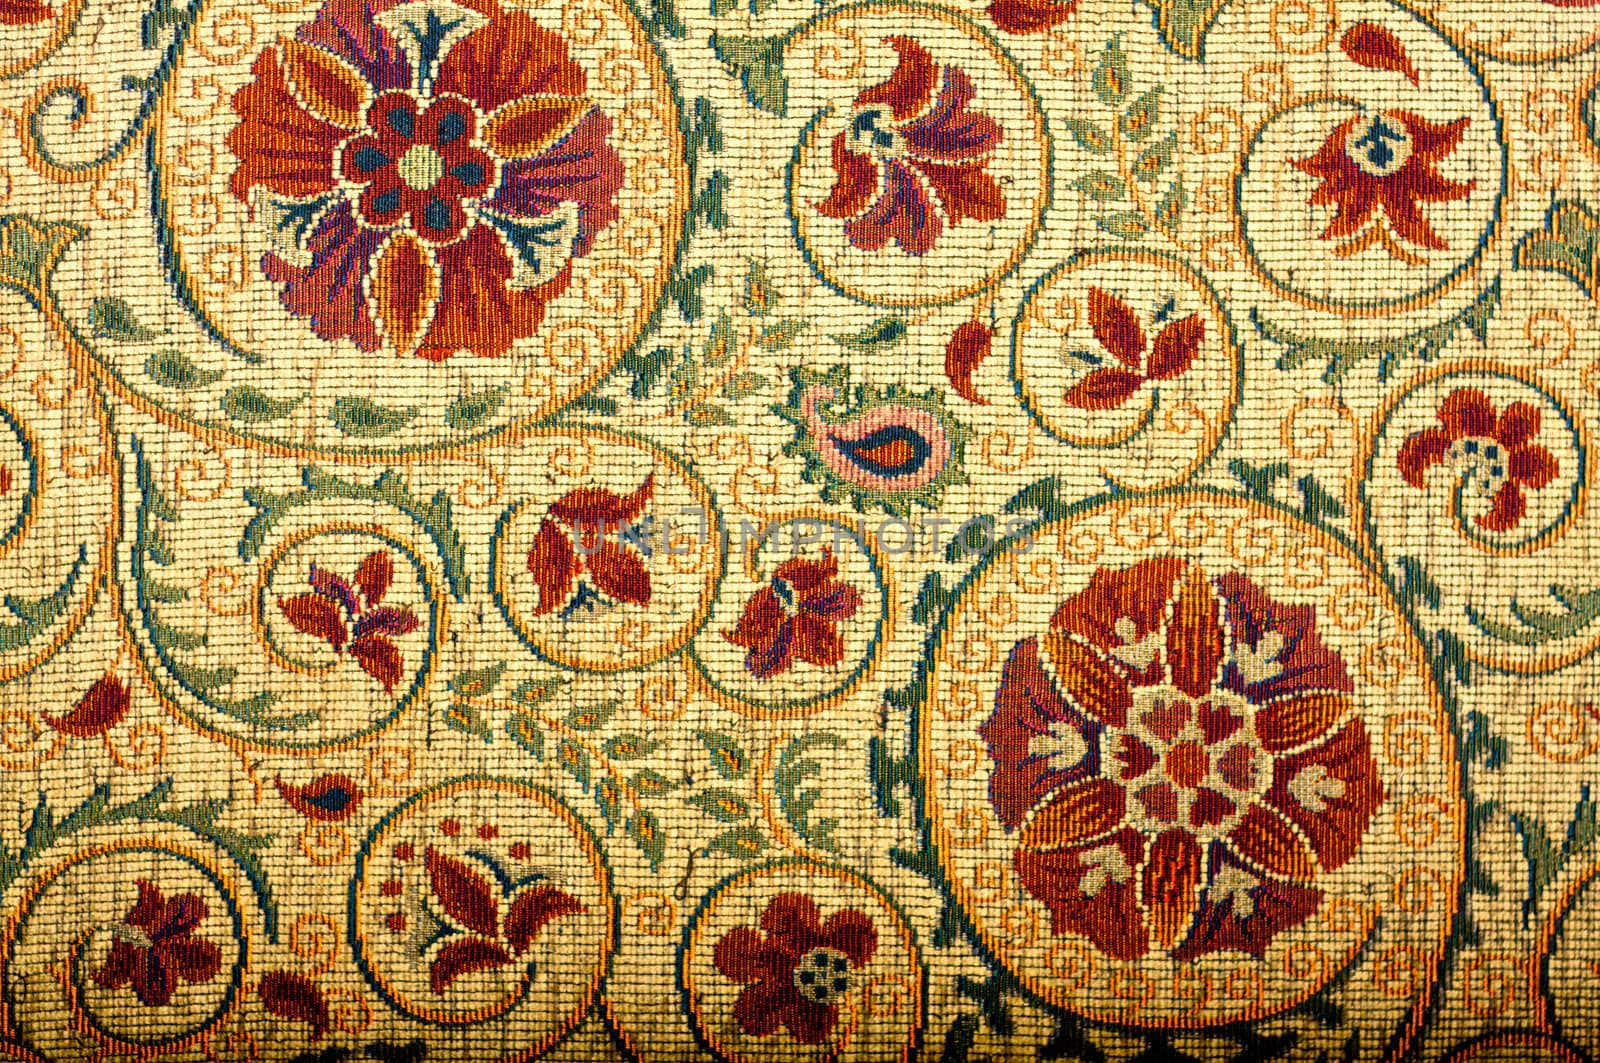 A medieval style flowered tapestry